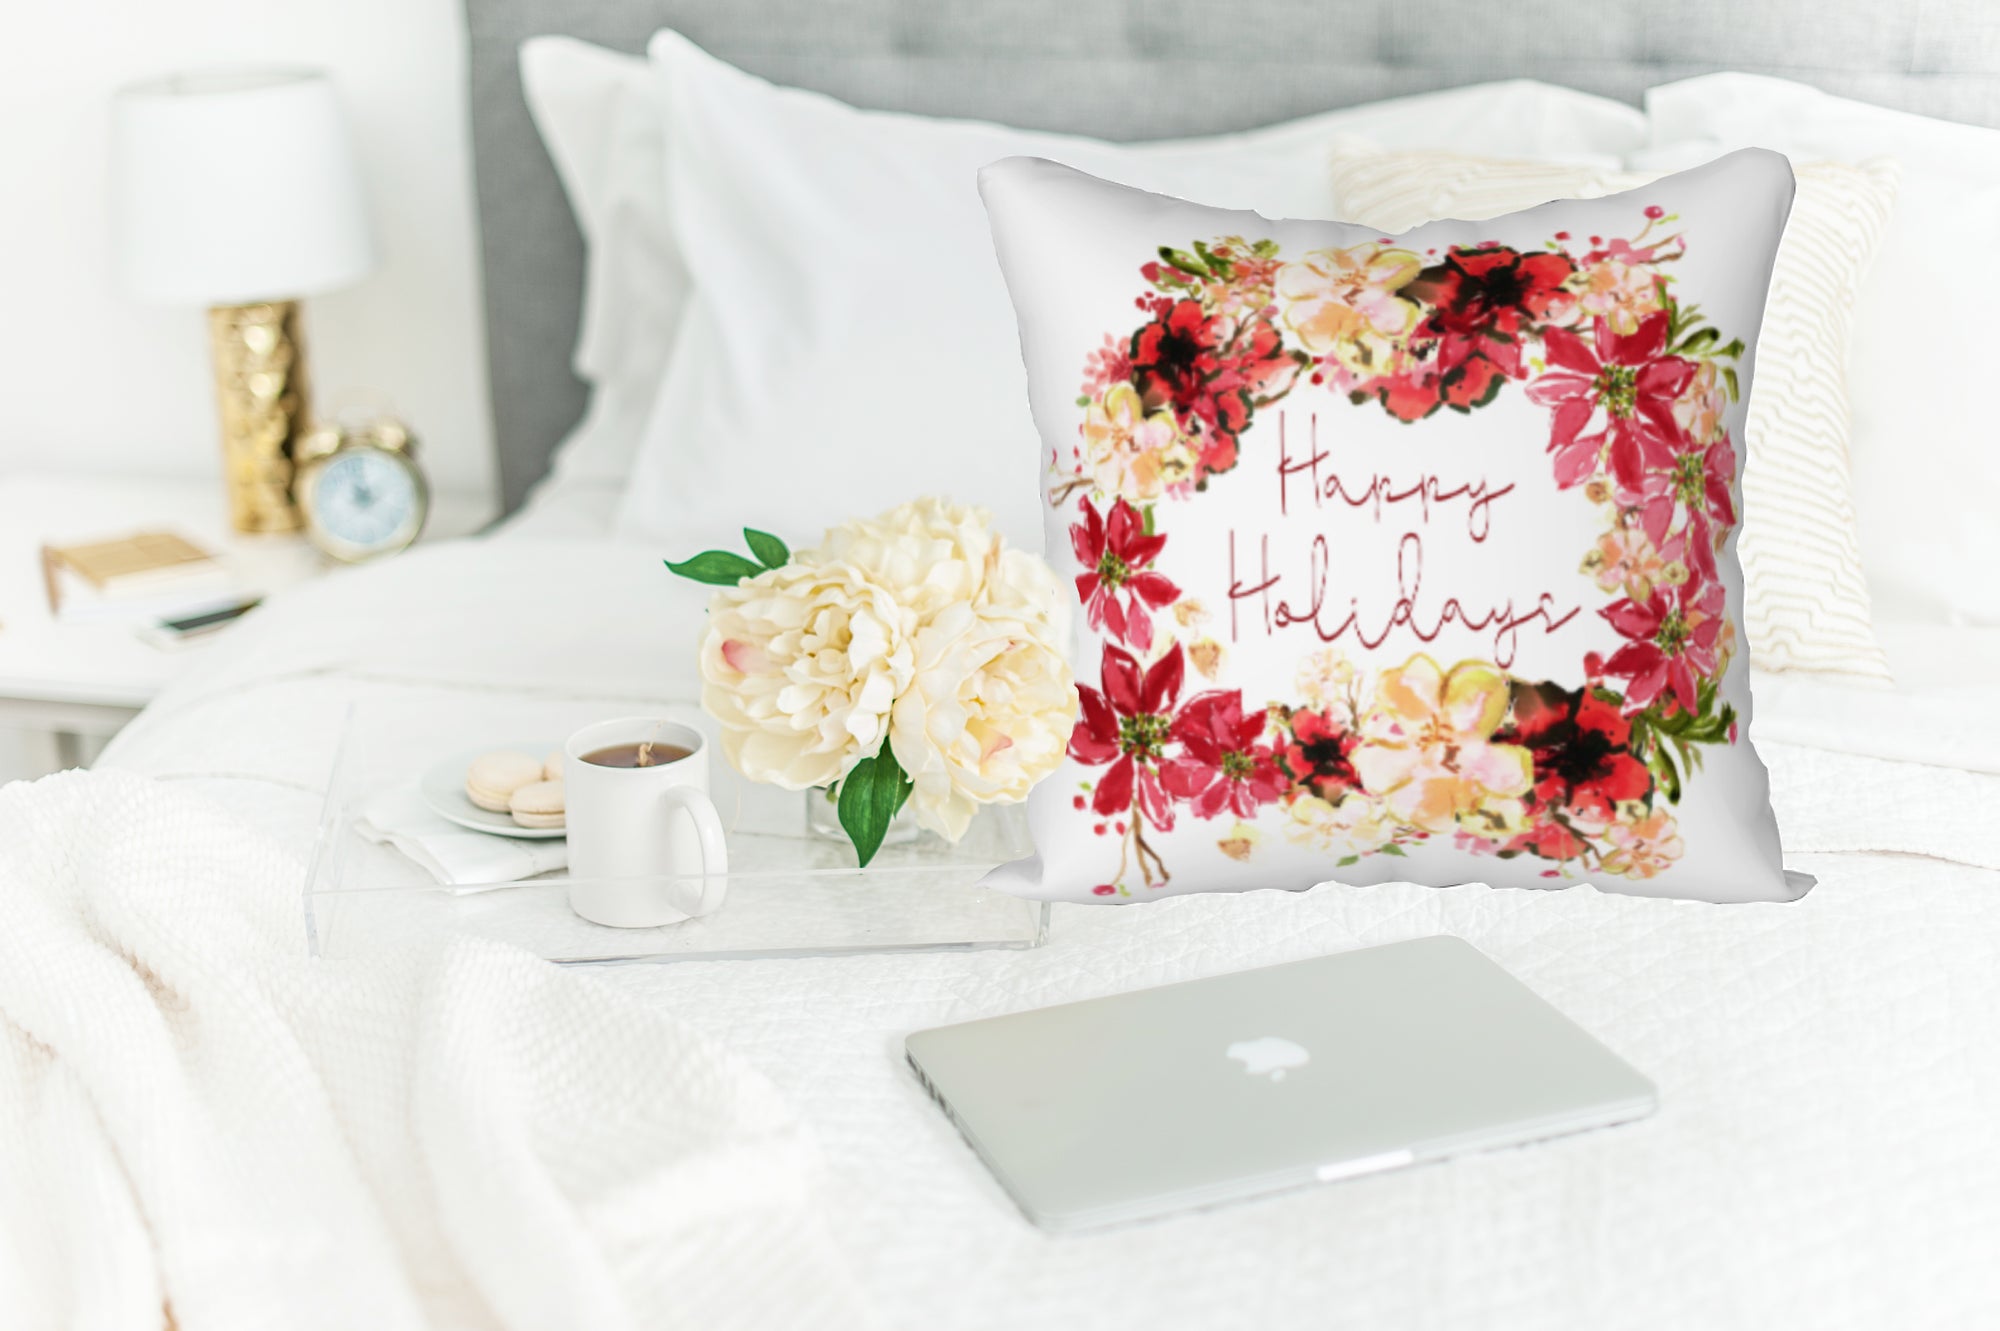 Pretty poinsettias and beige flowers surround the words "Happy Holidays" on this square pillow.  The image is printed on a white background. Perfect for a bedroom, a living room, a soft plush chair or anywhere you might want a pop of holiday cheer!